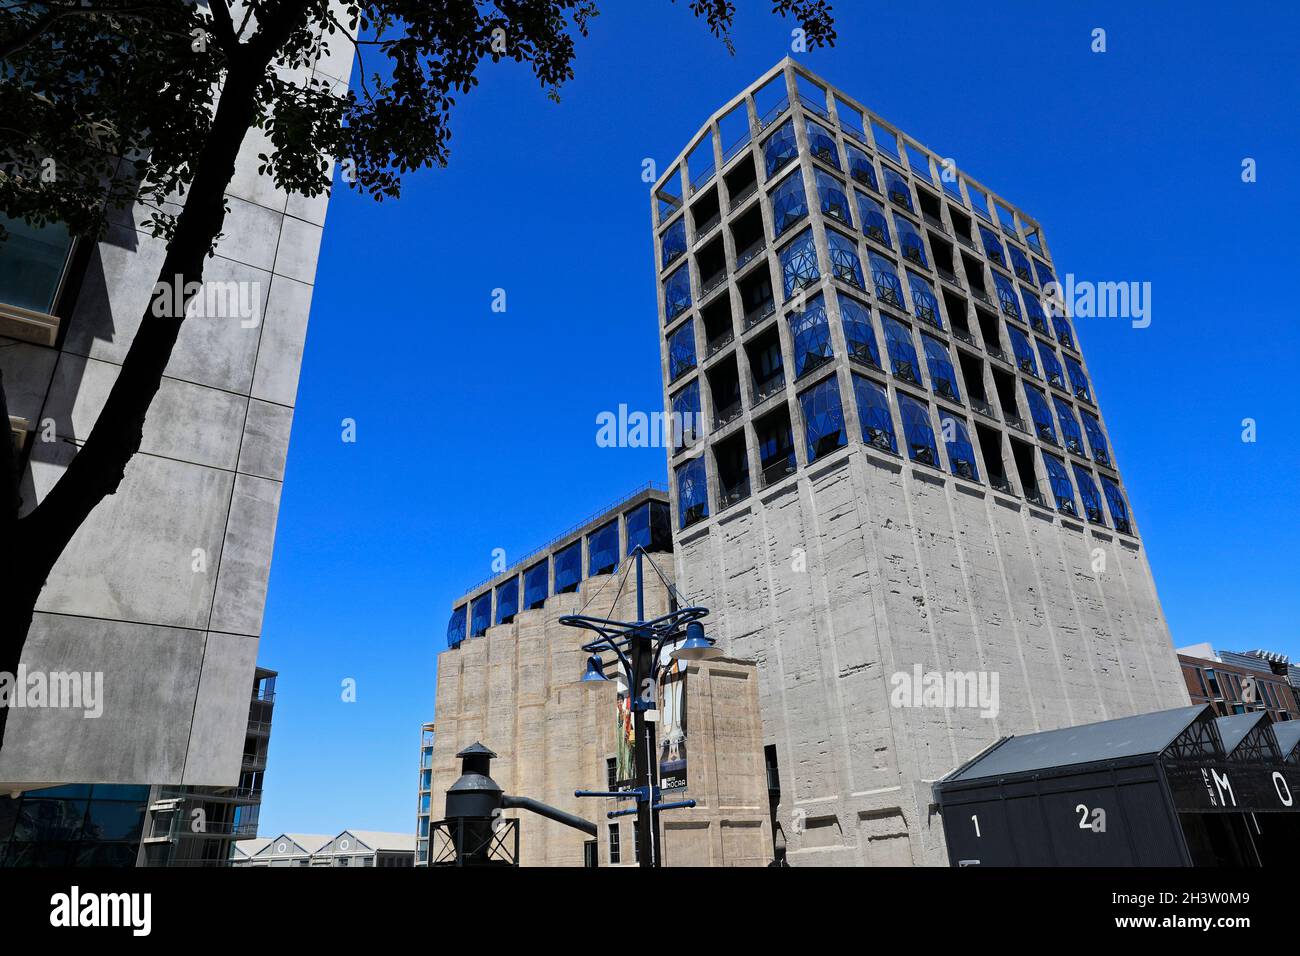 The Zeitz Museum of Contemporary Art Africa building in the V&A Waterfront in Cape Town, South Africa. Stock Photo